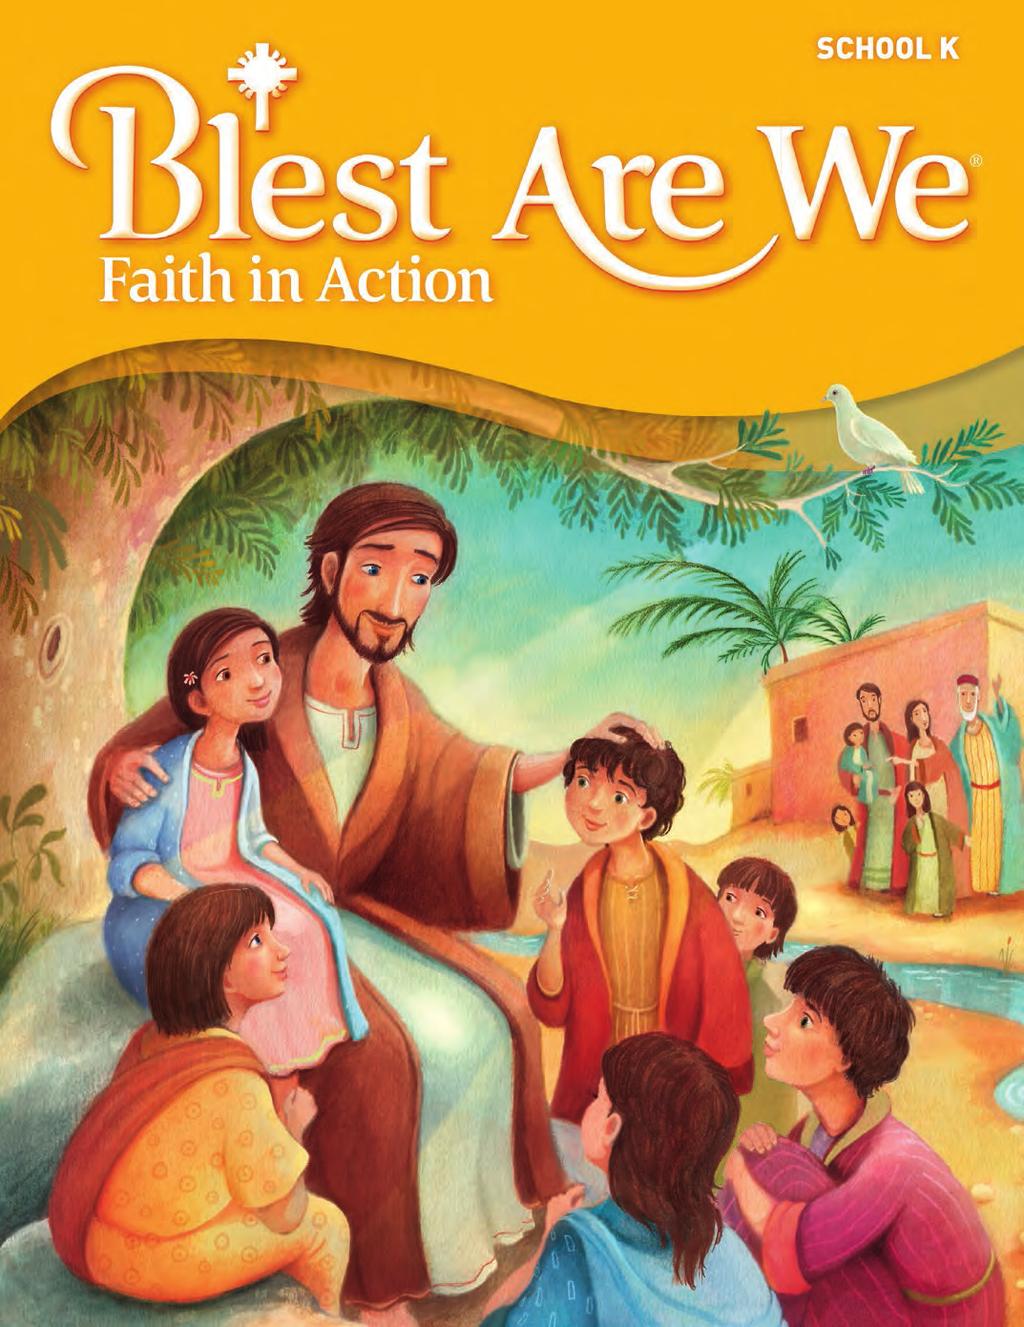 Kindergarten Student Edition Cover STUDENT EDITION COVER 3 Blest Are We Faith in Action logo honors the legacy of the series culminating in an understanding of